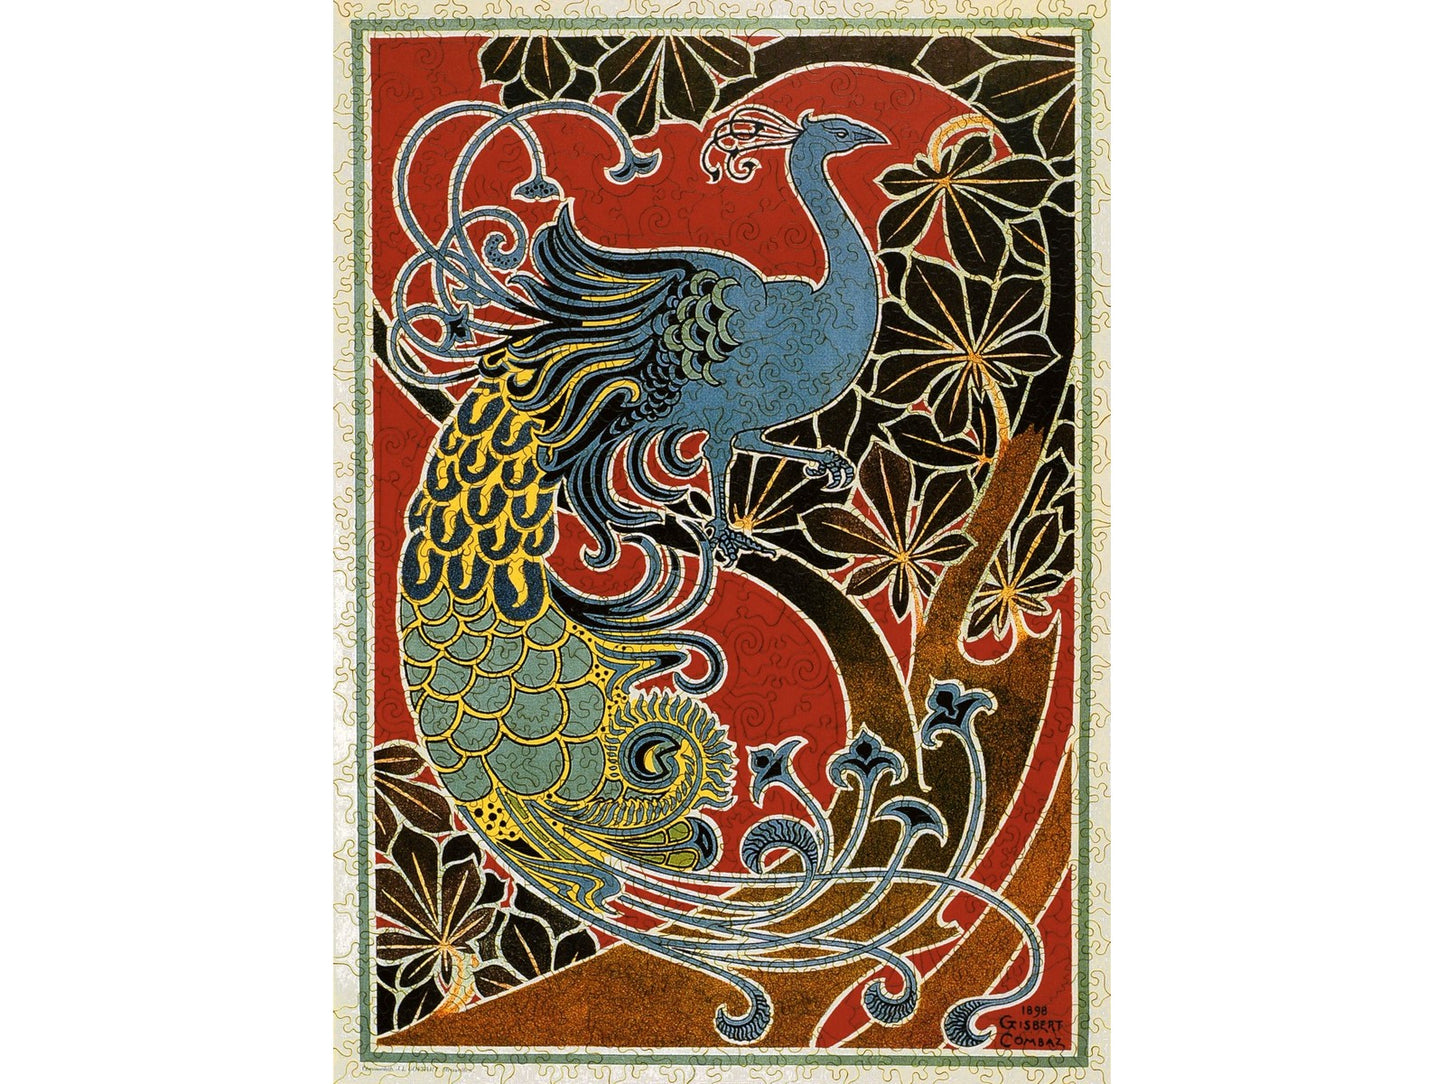 The front of the puzzle, Libre Esthetique, which shows a peacock and botanical pattern.